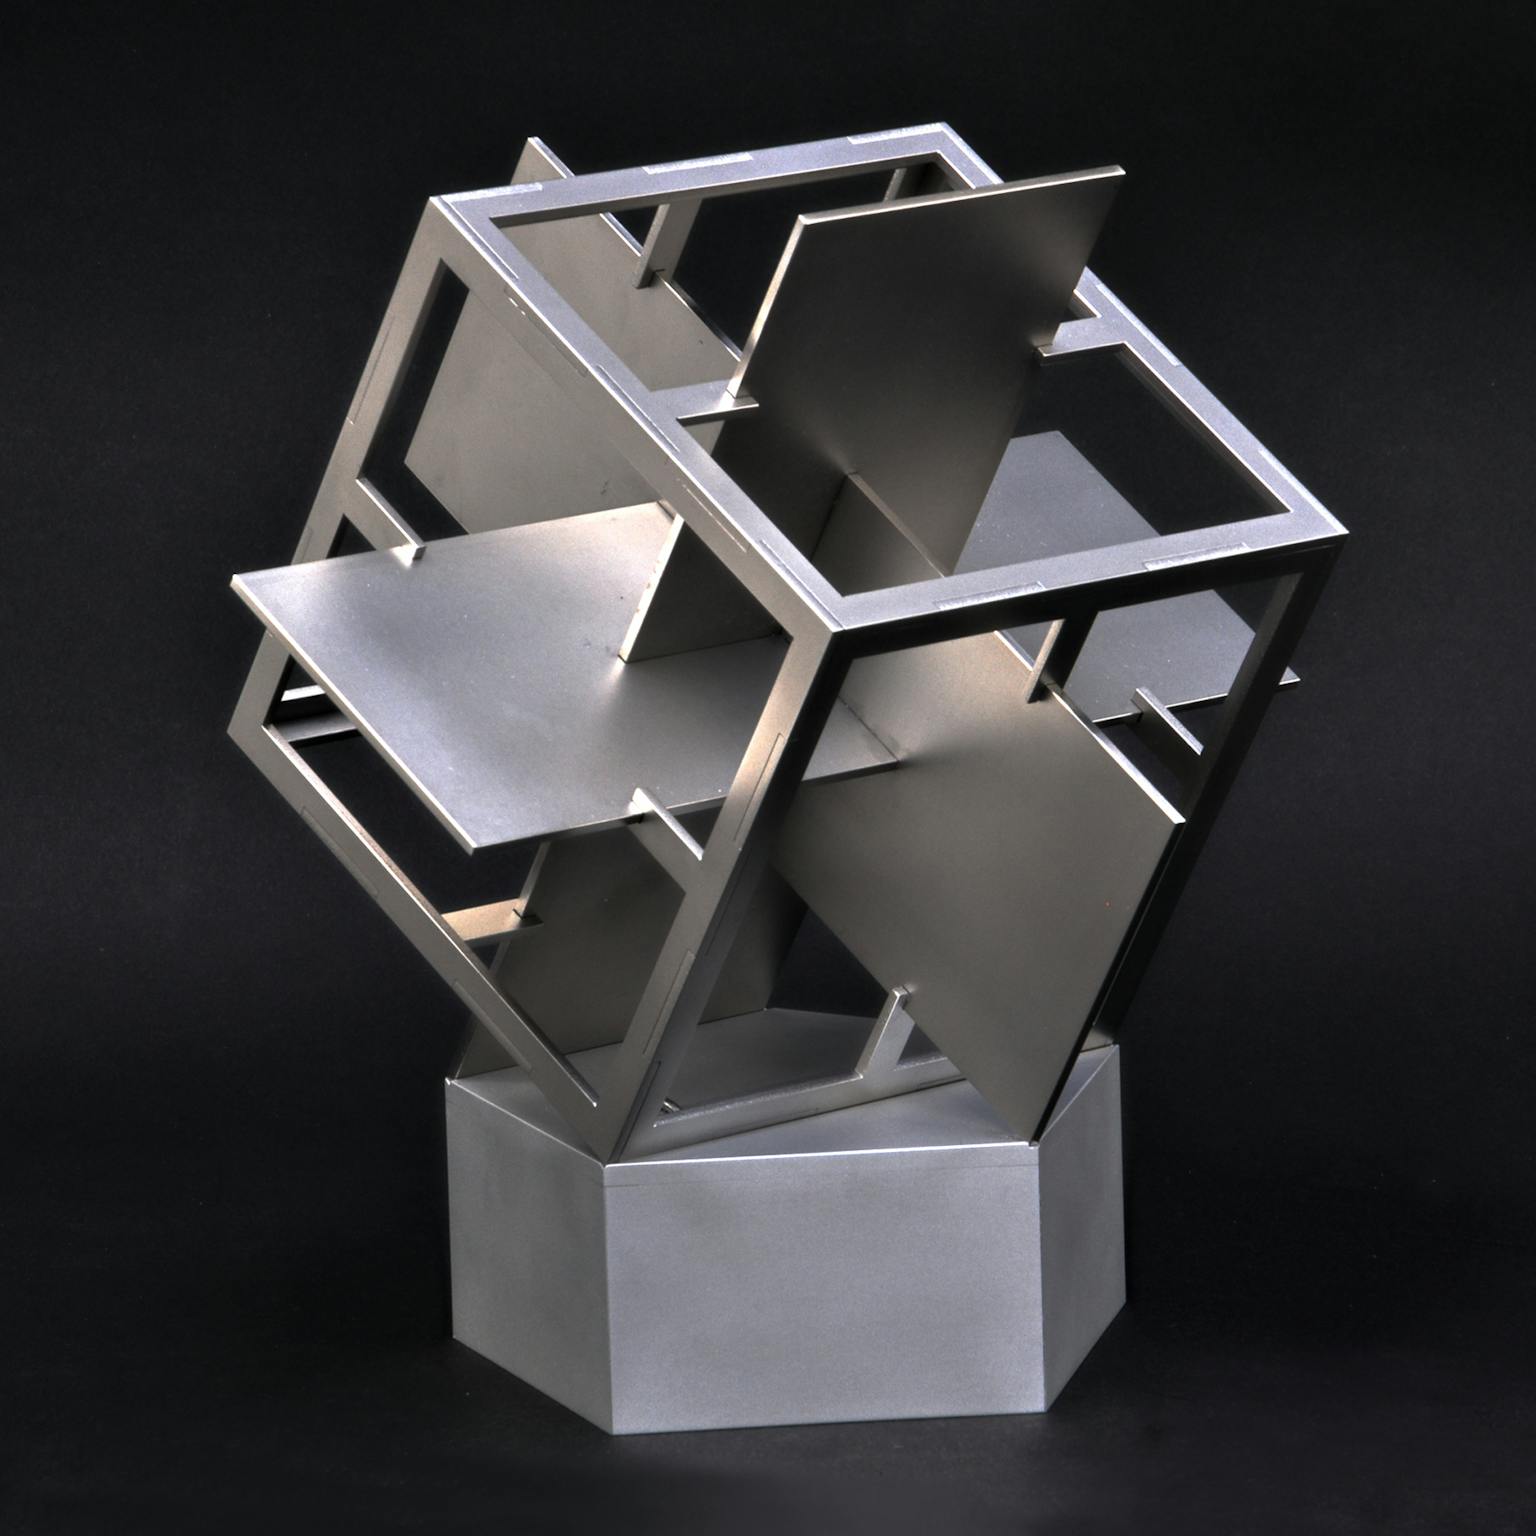 Pentagonal dodecahedron without casing by Friedhelm Kürpig